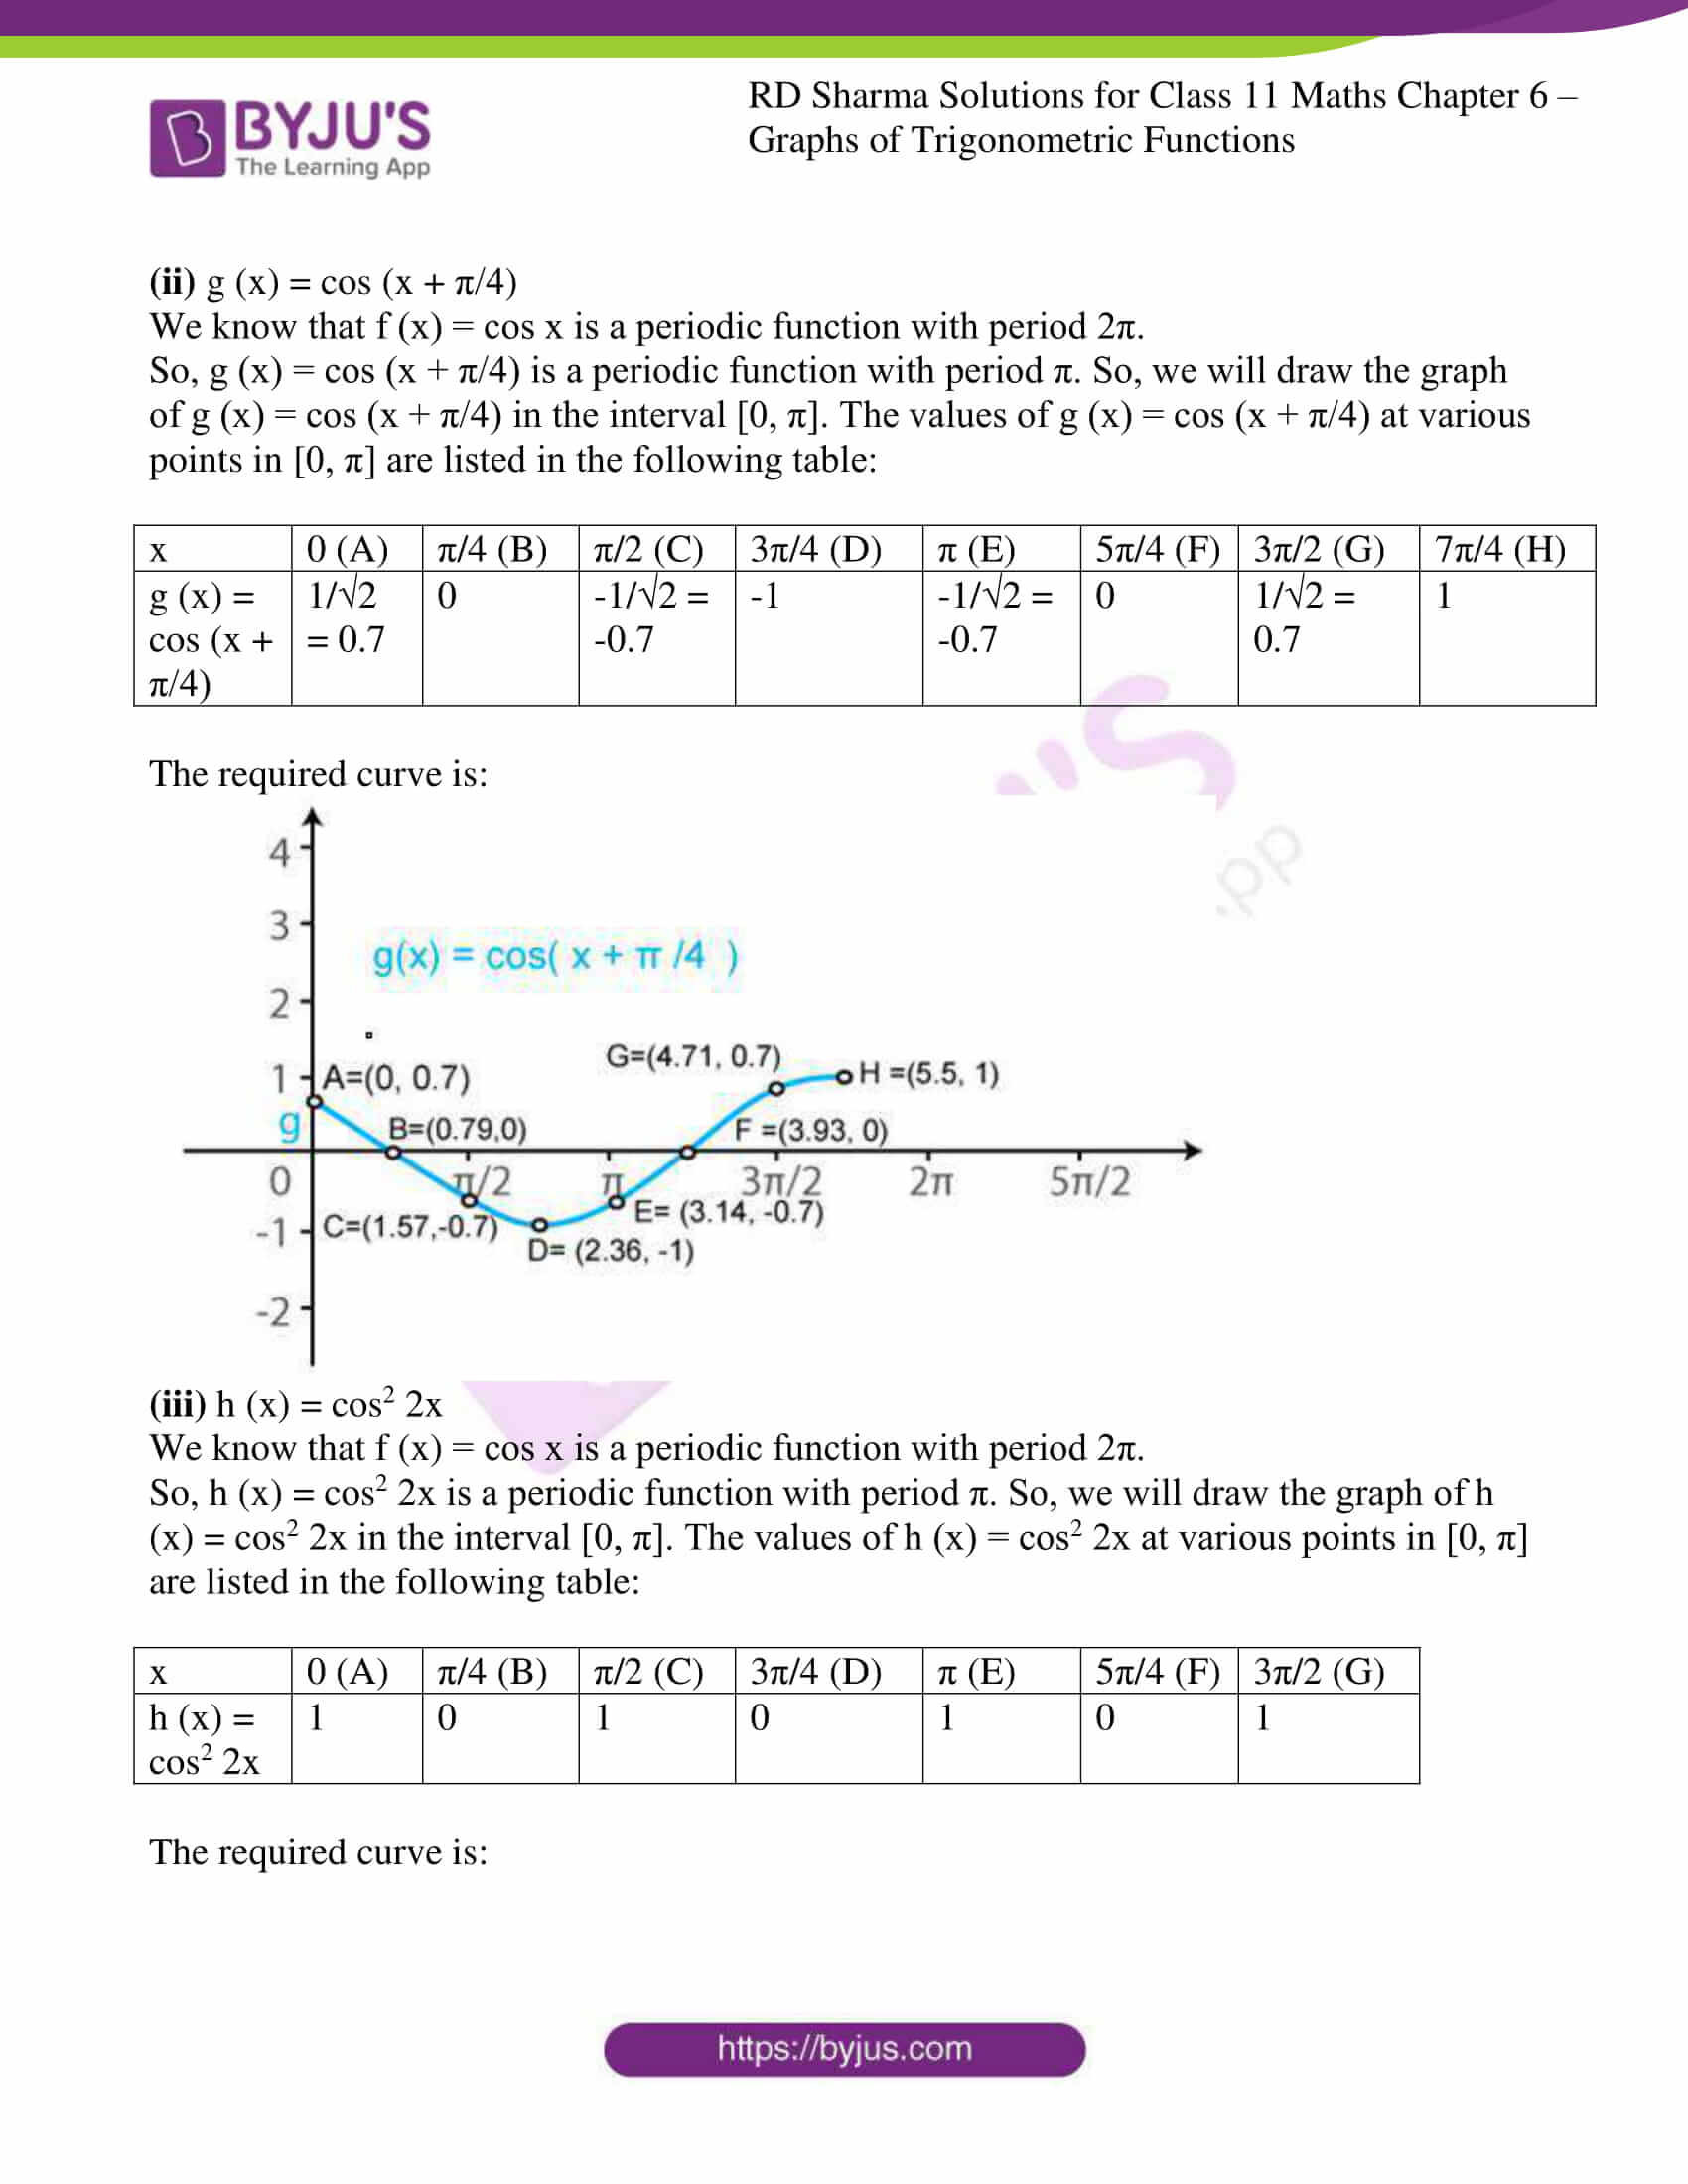 Graphing Trig Functions Practice Worksheet Rd Sharma solutions for Class 11 Chapter 6 Graphs Of